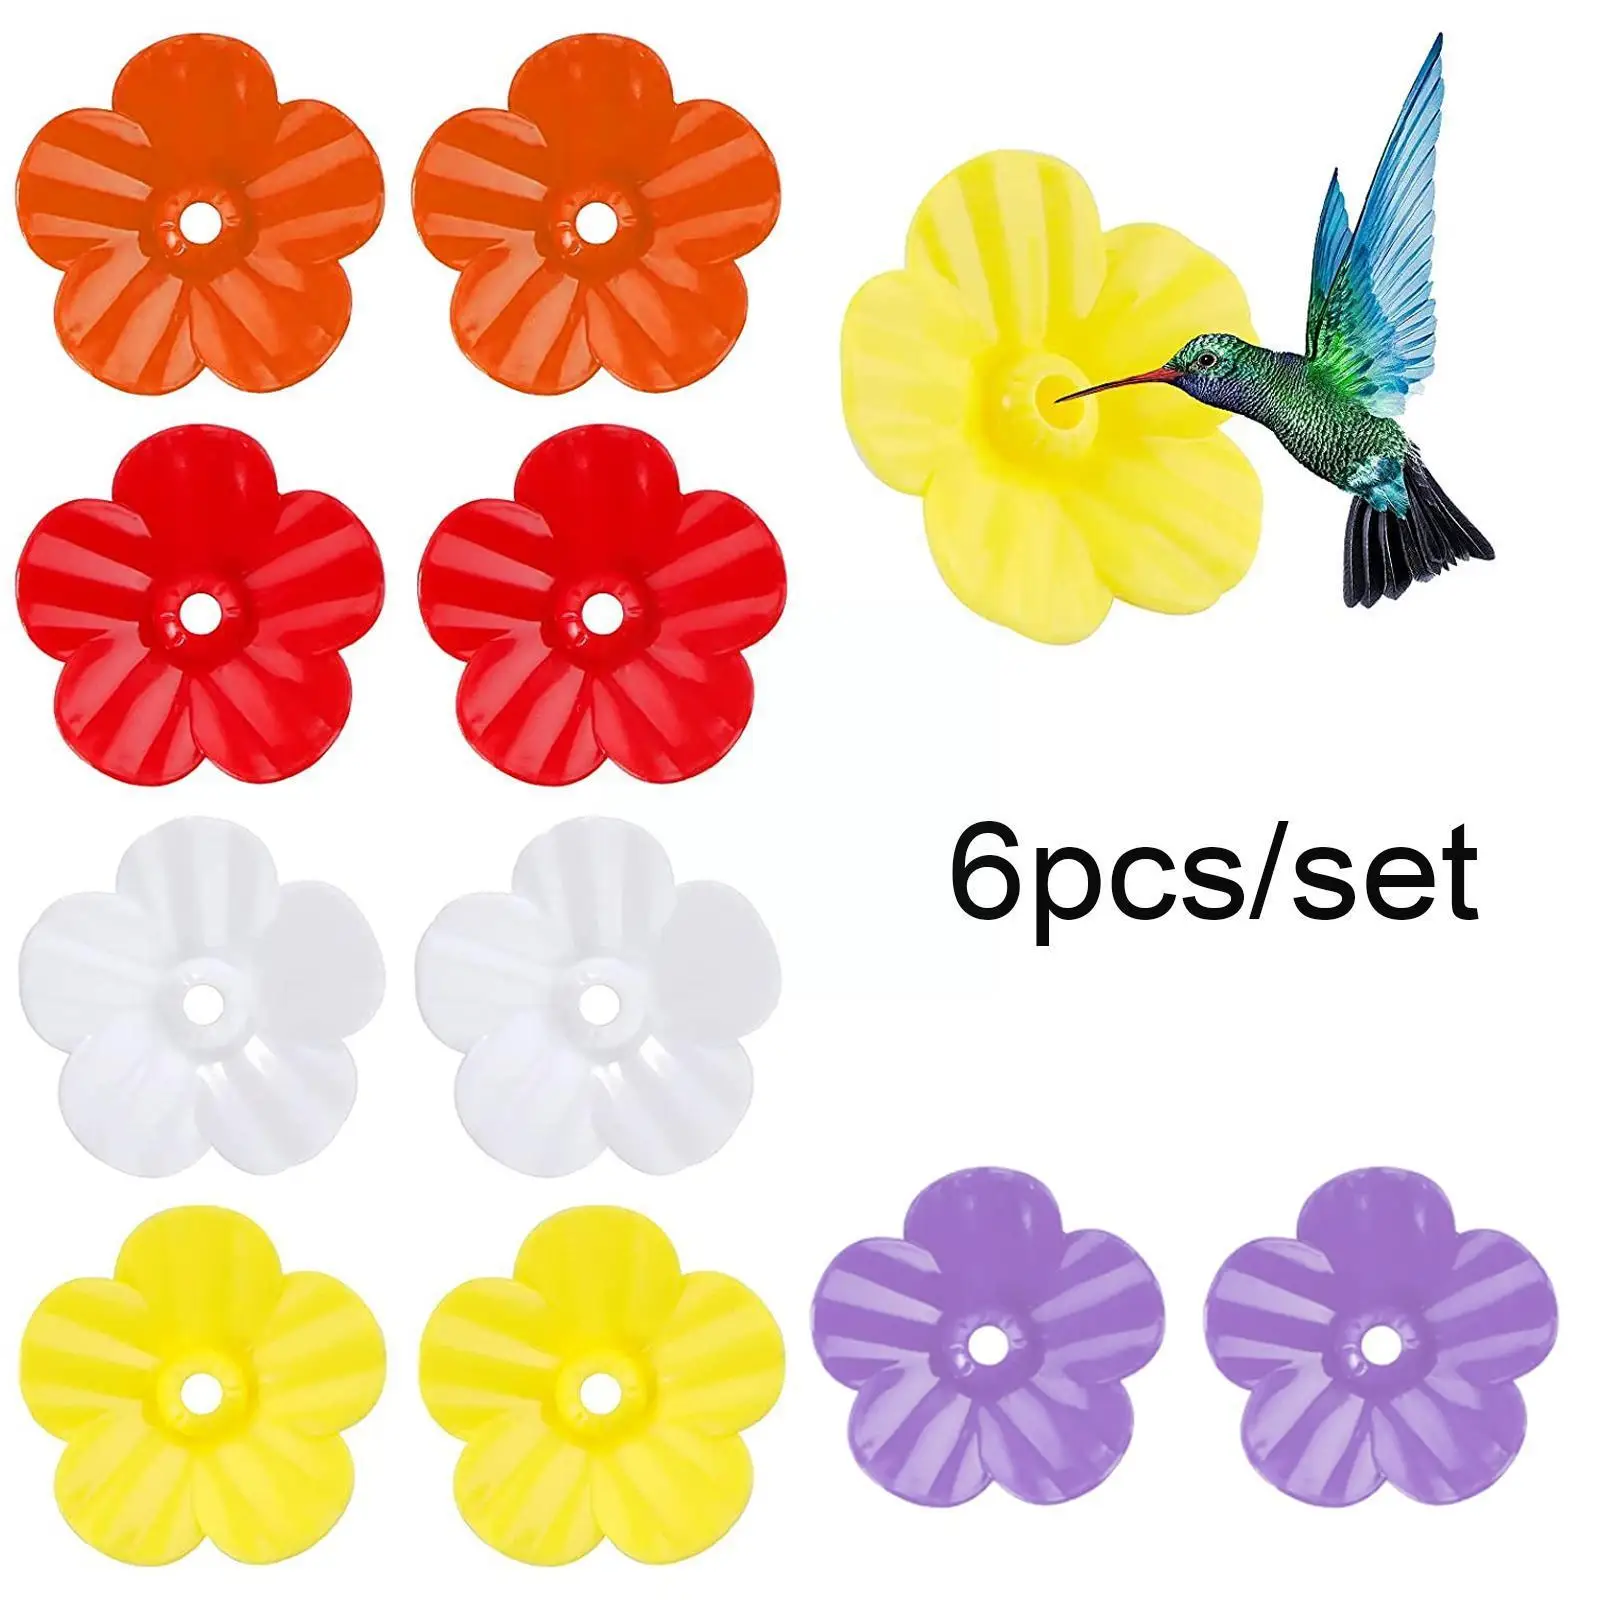 Flowers Outdoor Plastic Feeding Ports Replacement Parts For Feeder Hanging Use Supply I3y6